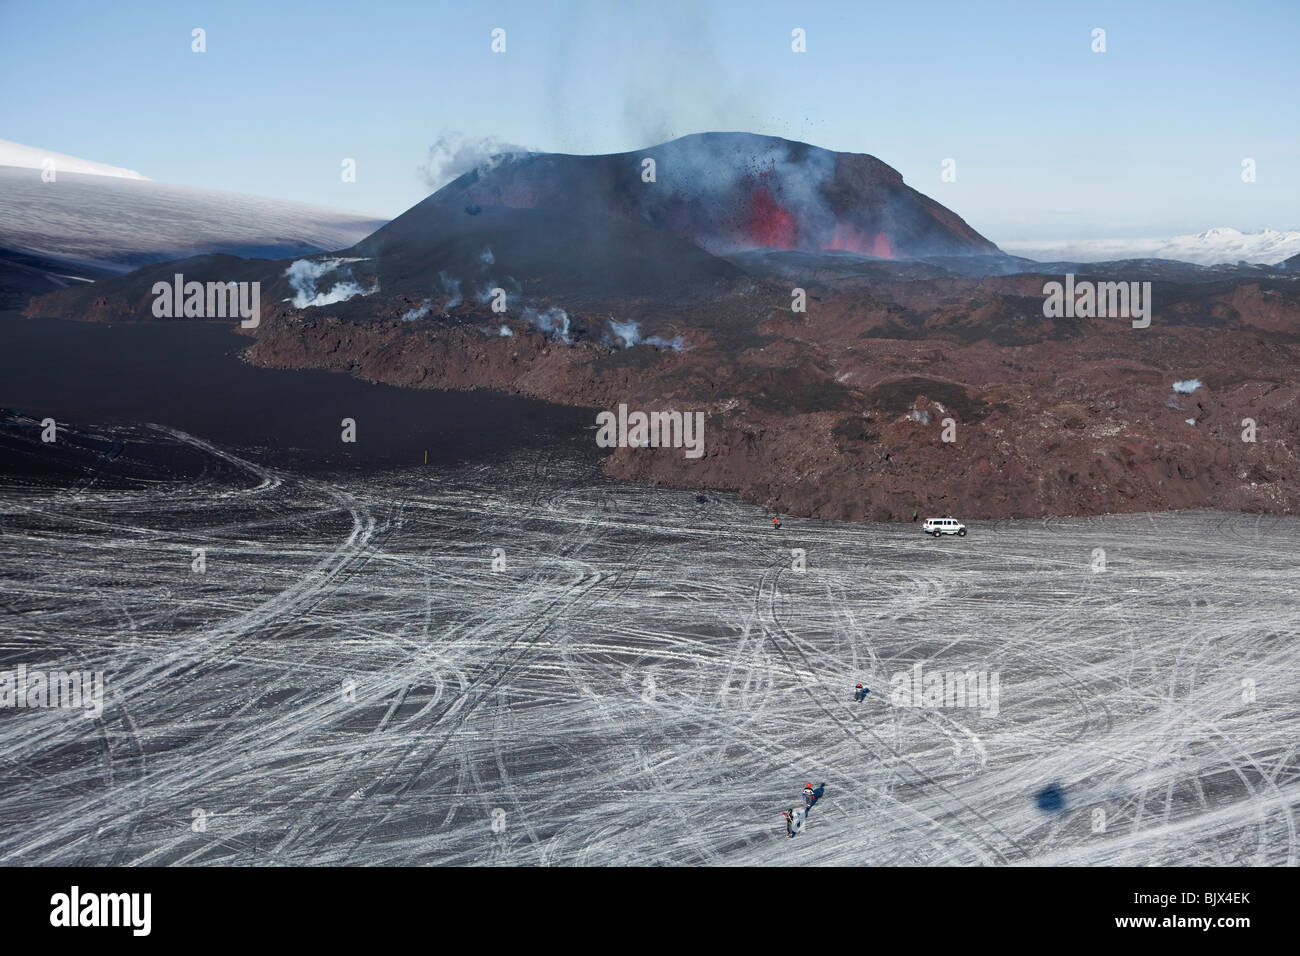 New lava from the volcanic eruption at Fimmvorduhals, in Eyjafjallajokull, Iceland Stock Photo